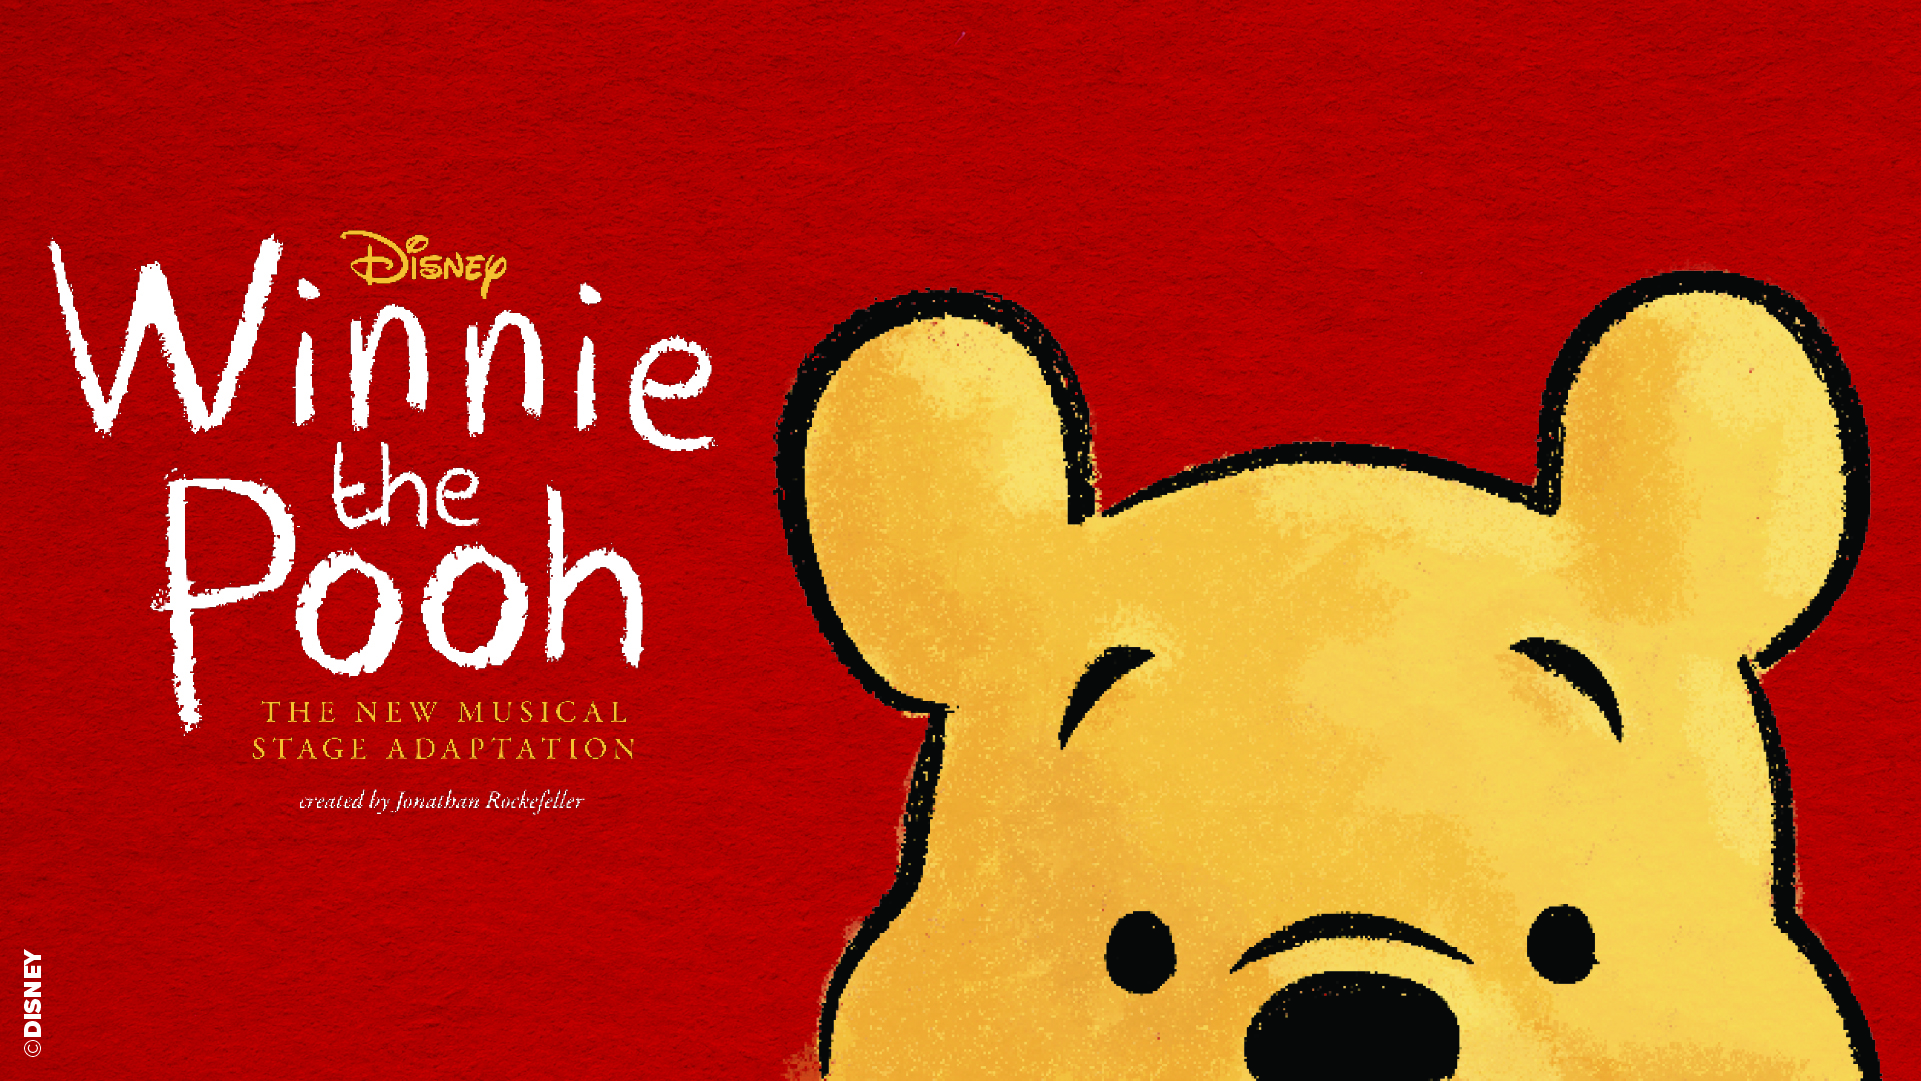 Disney's Winnie the Pooh review: new musical is a whimsical delight